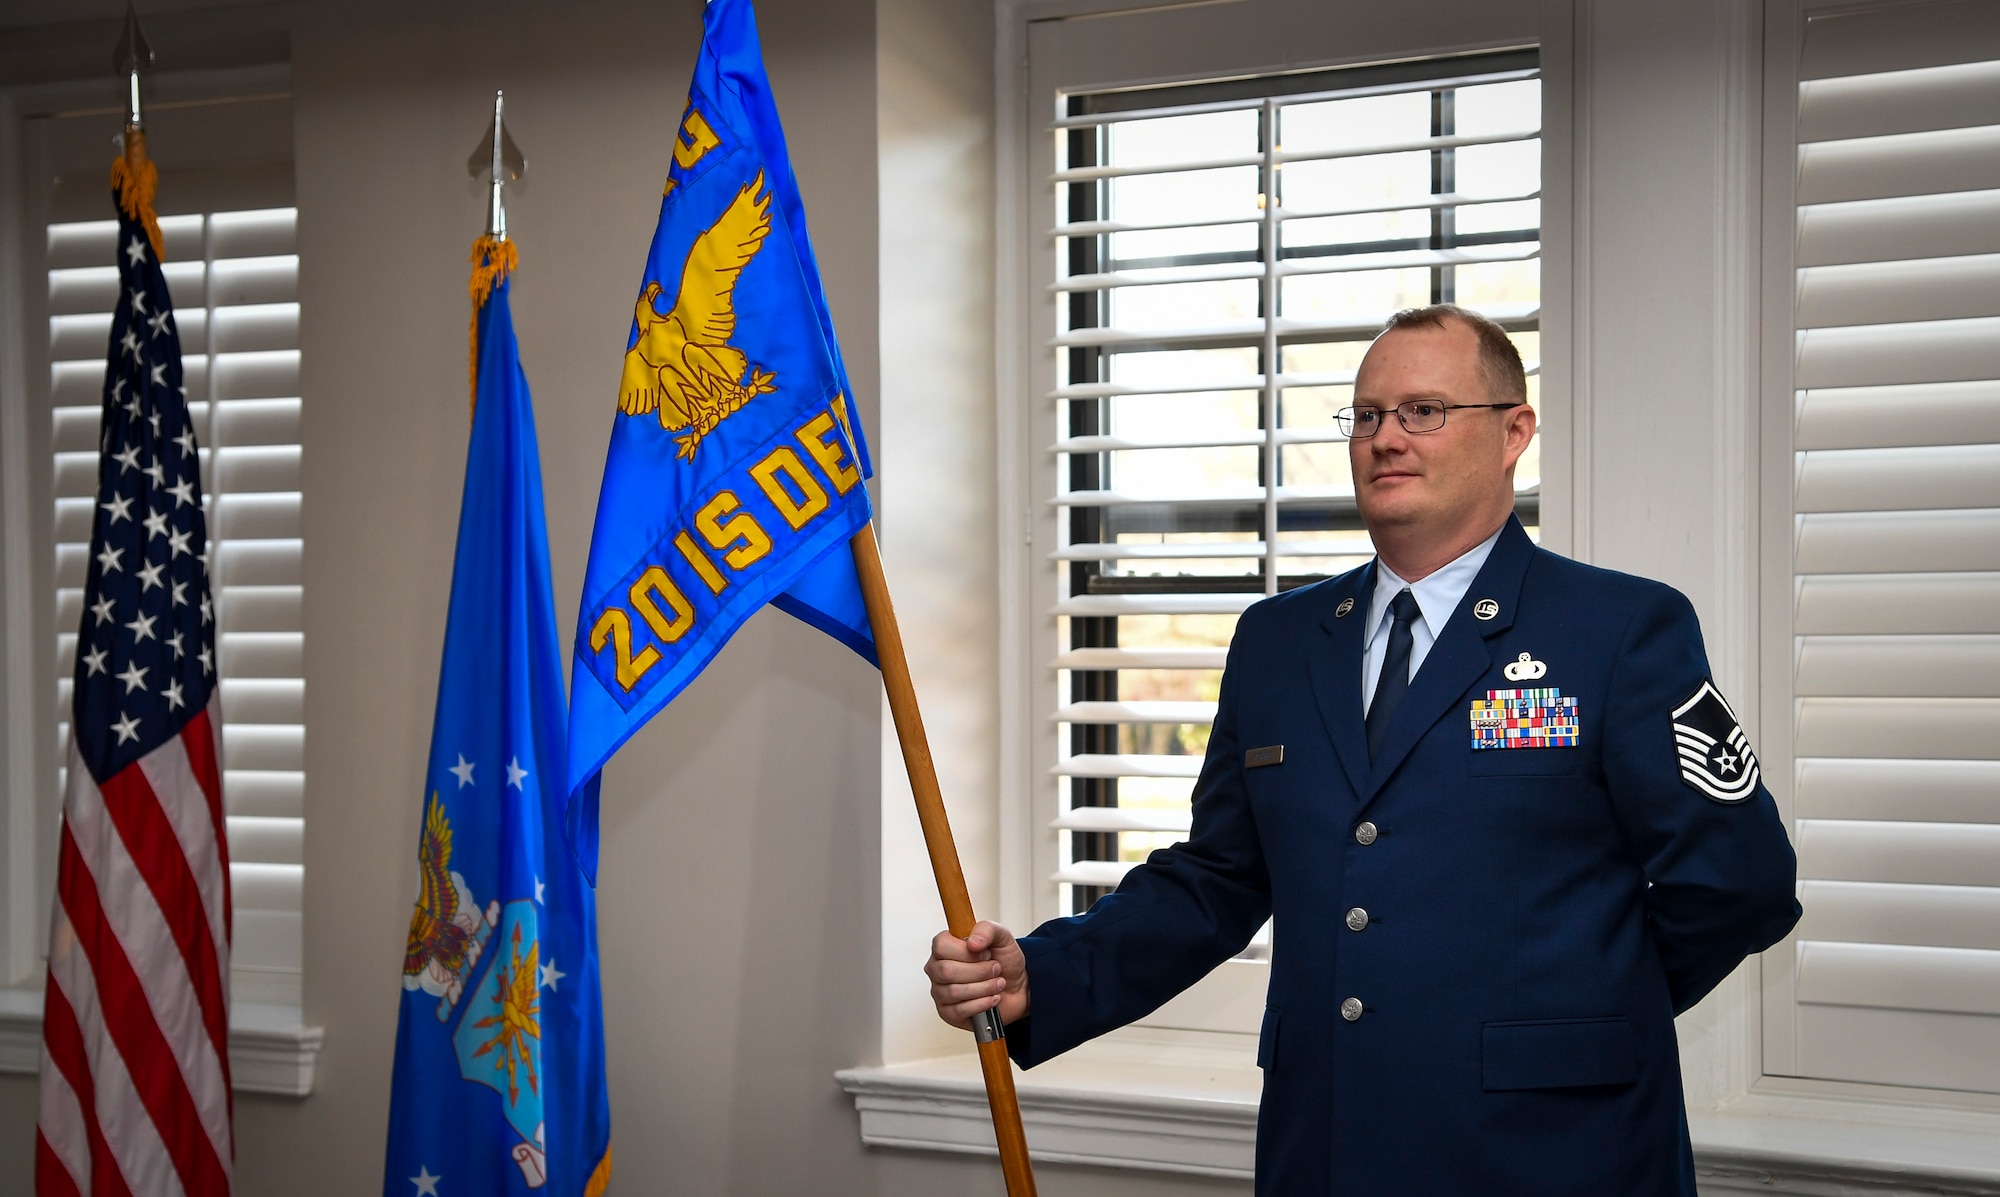 An Airman stands at parade rest holding guidon.